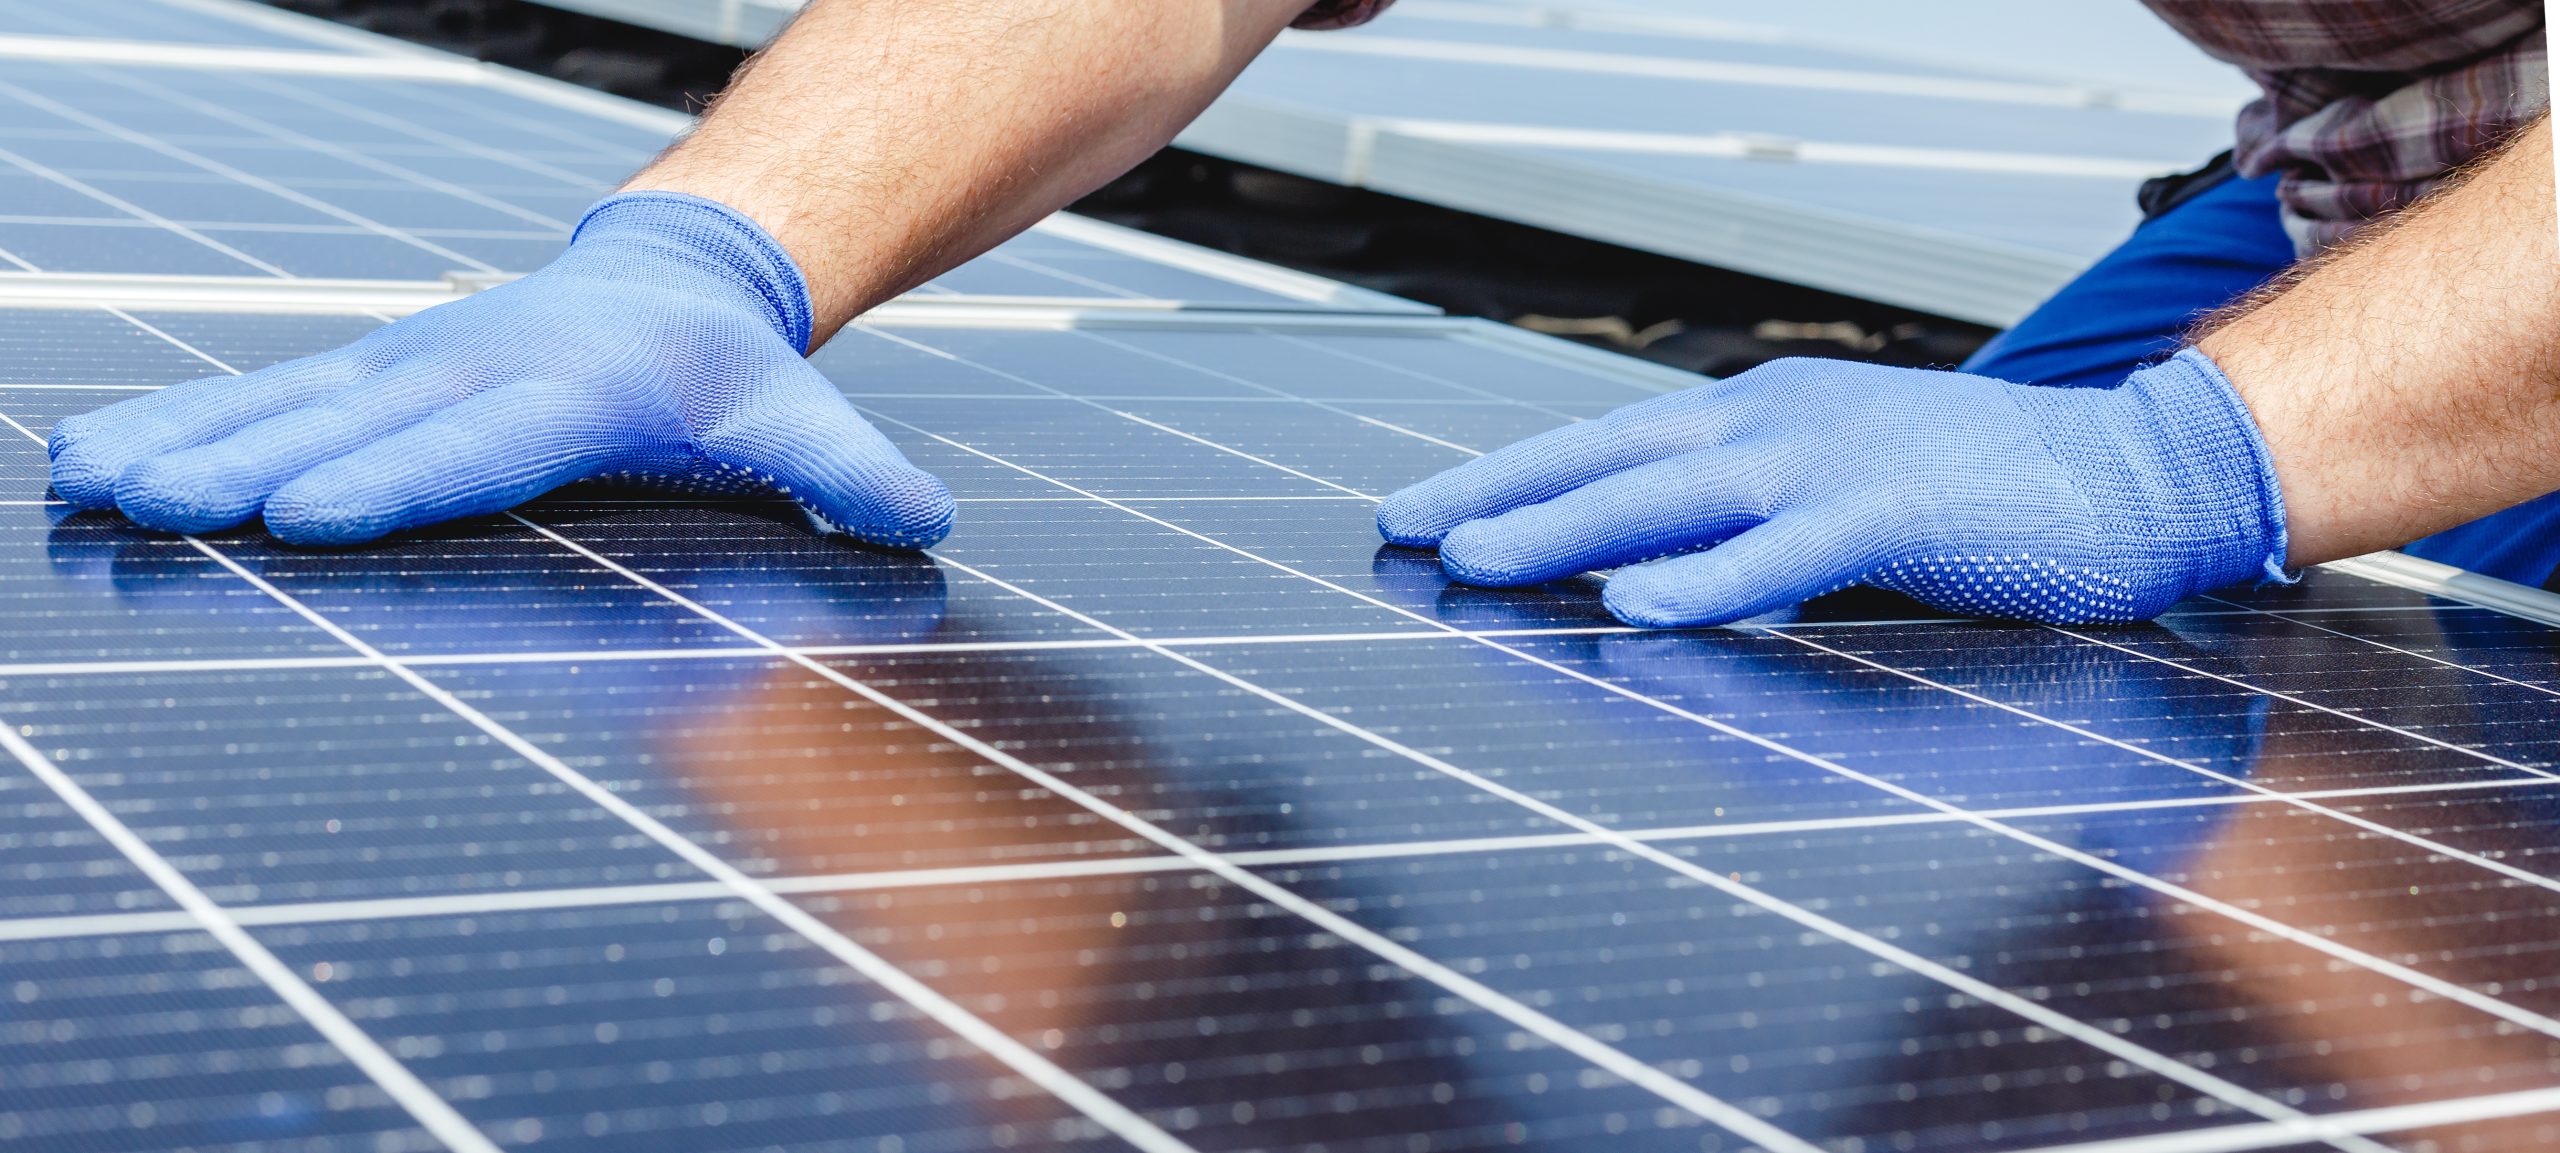 These Efficiency Breakthroughs Could Greatly Harness Solar Energy